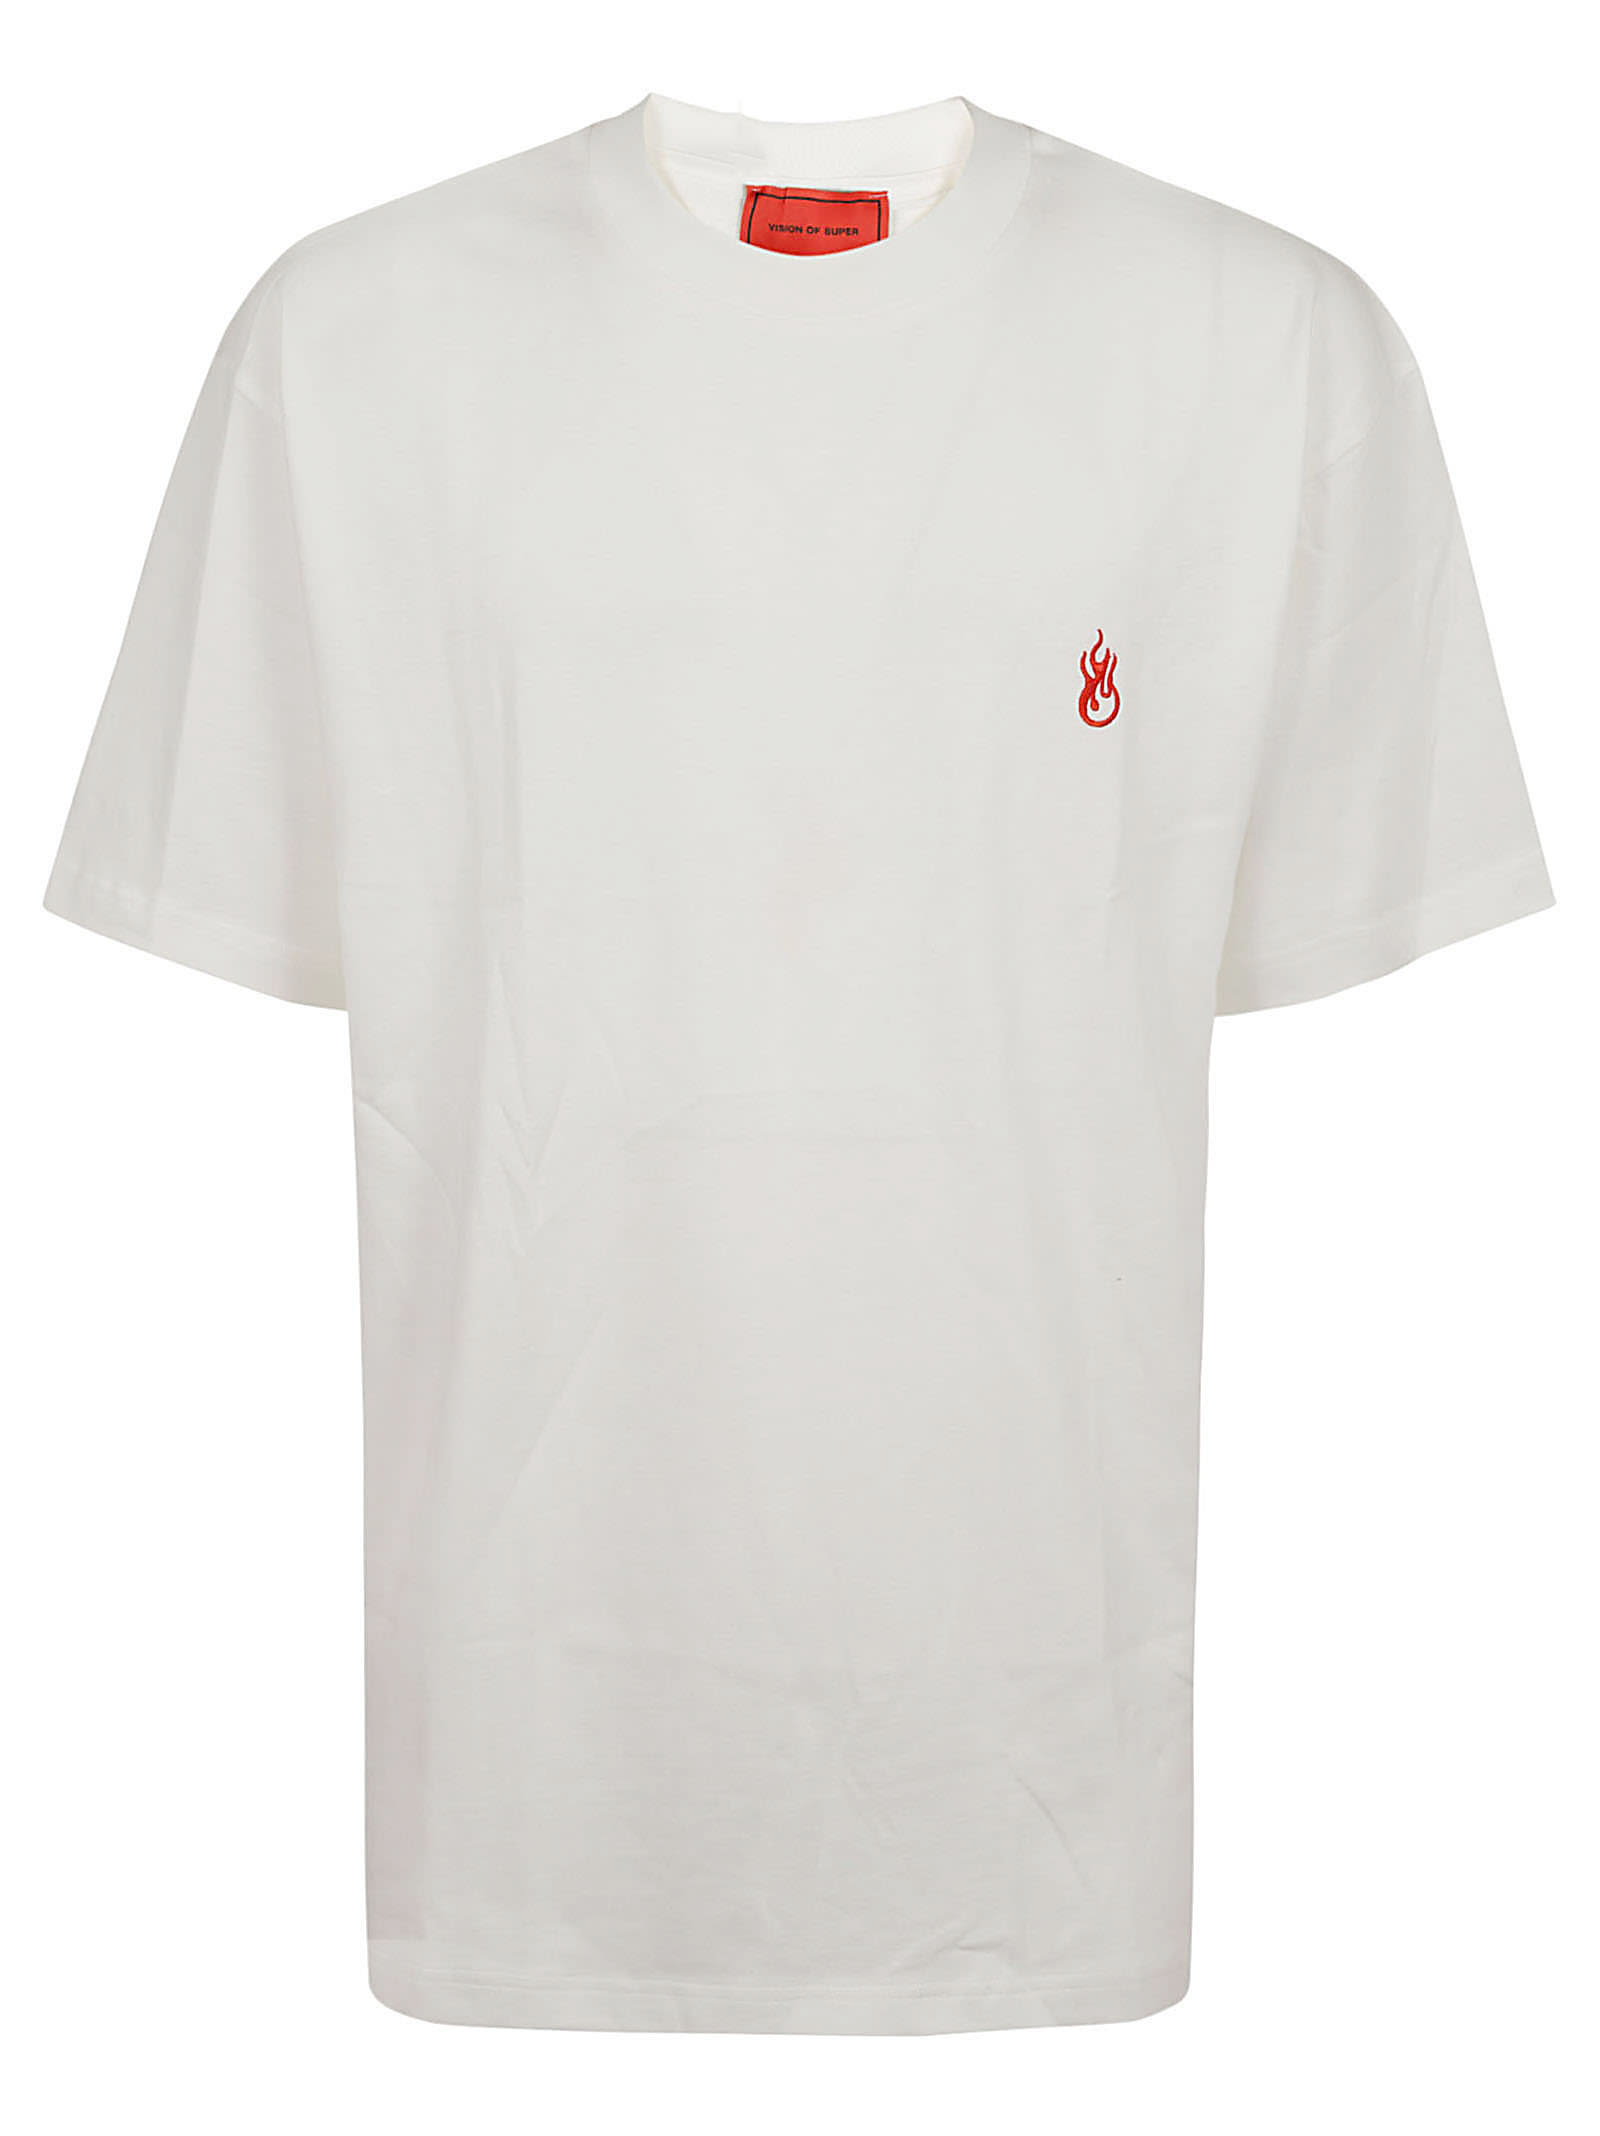 White T-shirt With Flames Logo And Metal Label